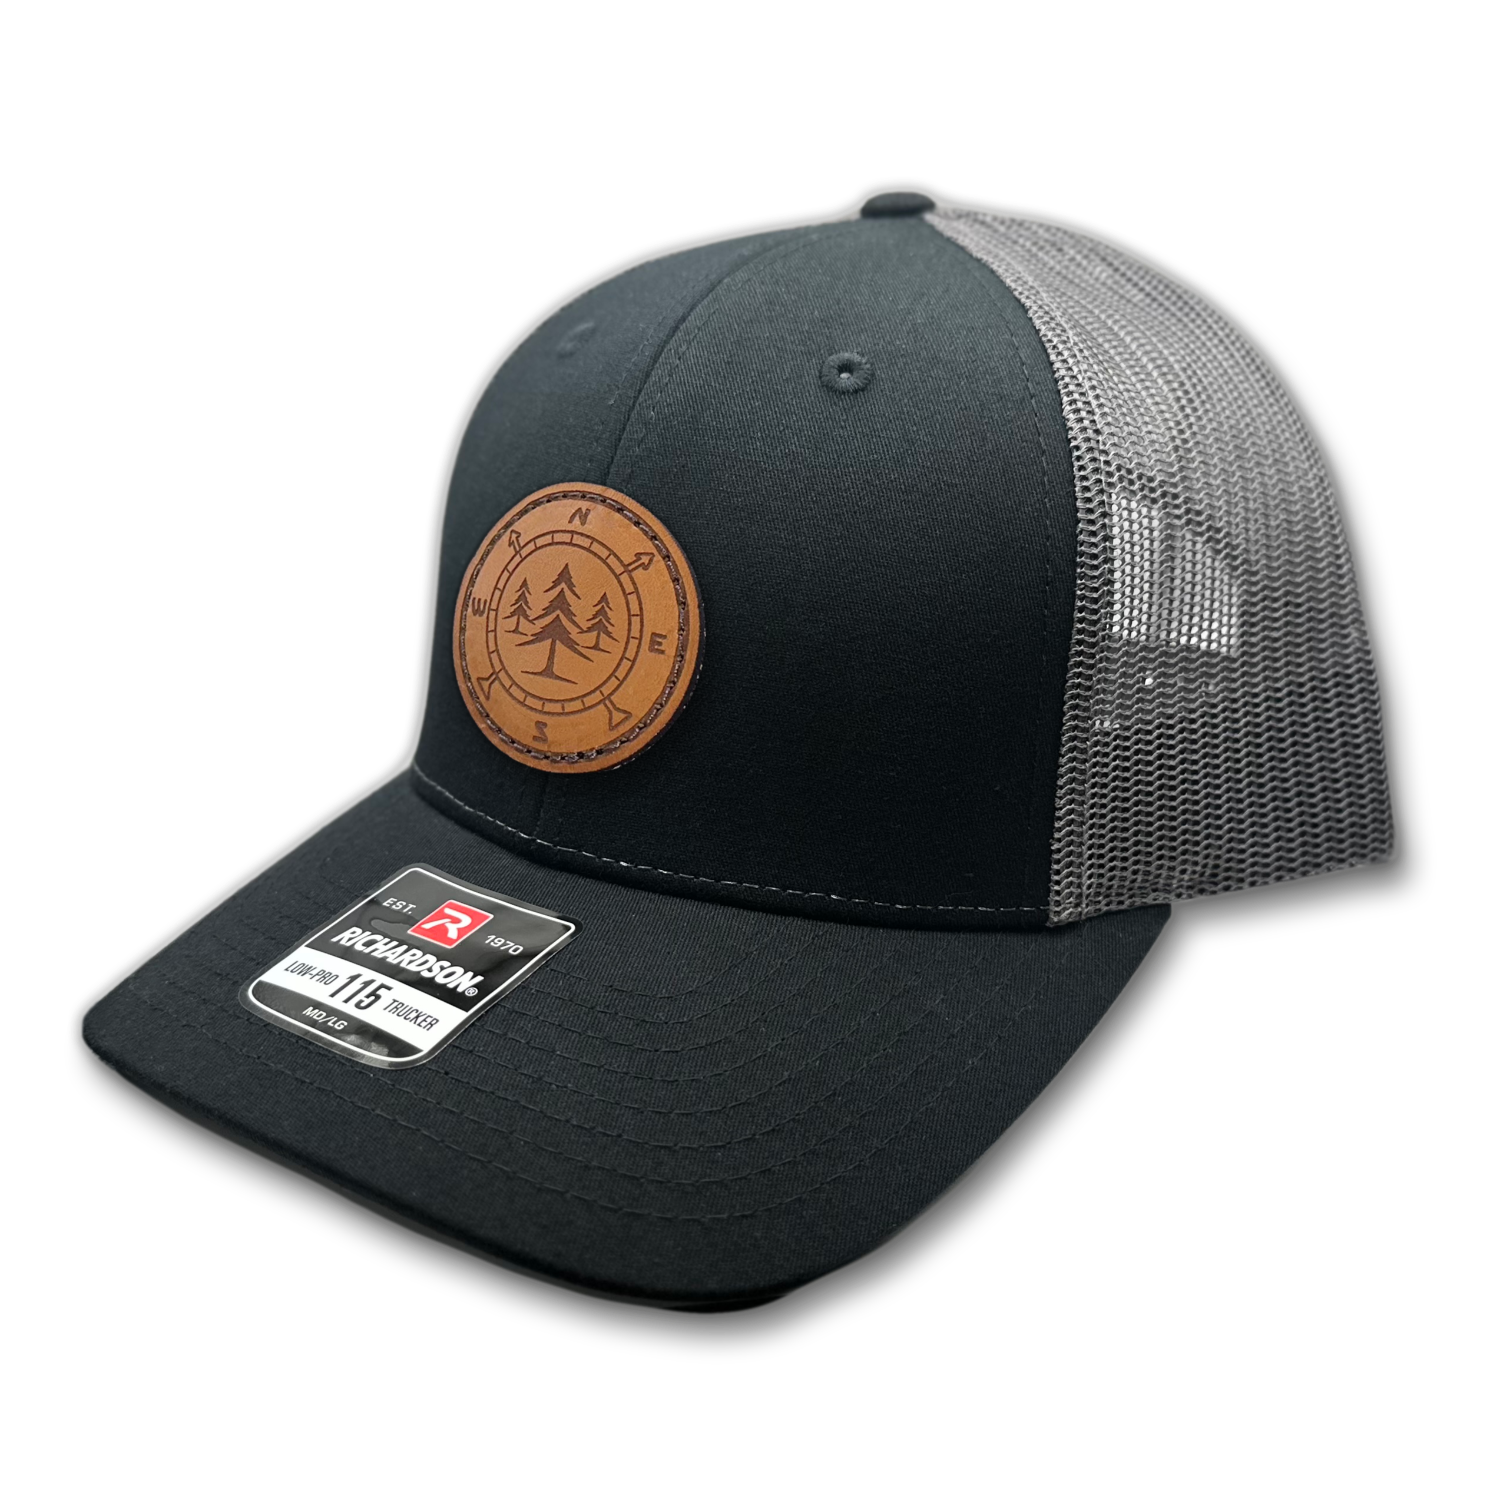 A close-up photo of a leather patch hat called Lost Pines. The hat features a unique compass and pine trees design on a circular leather patch that is sewn onto the front. The hat is a charcoal/black Richardson 115 low profile SnapBack adjustable hat, made in the USA. Available m/l sizes and multiple colors. Inspired by the mountains of Colorado, USA. 